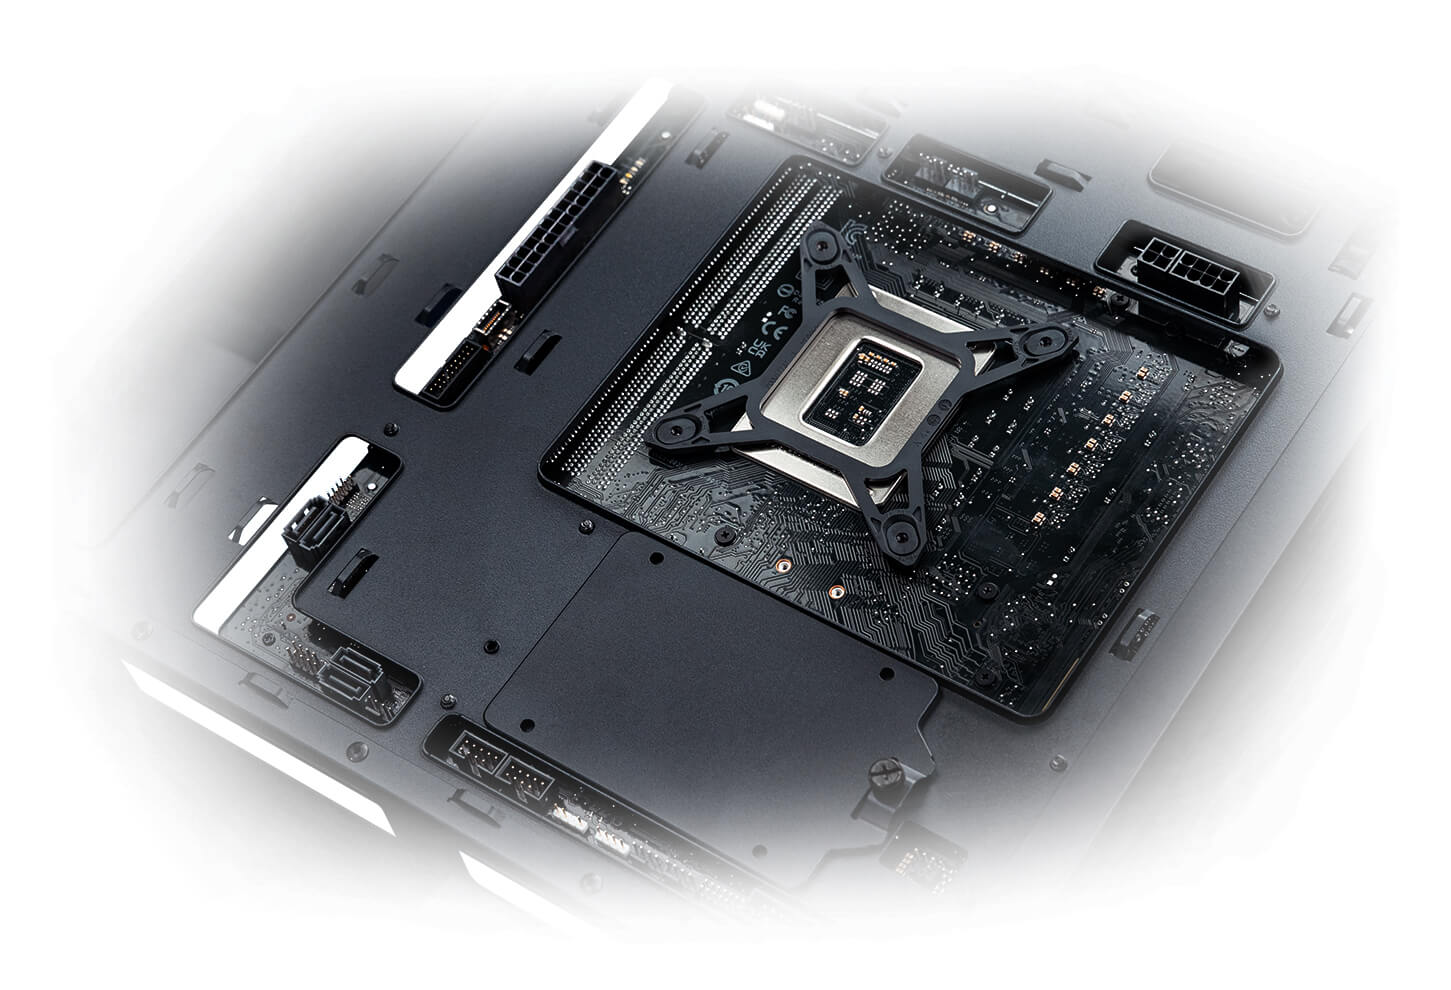 Hidden connector motherboard installed in the ASUS A21 PC case